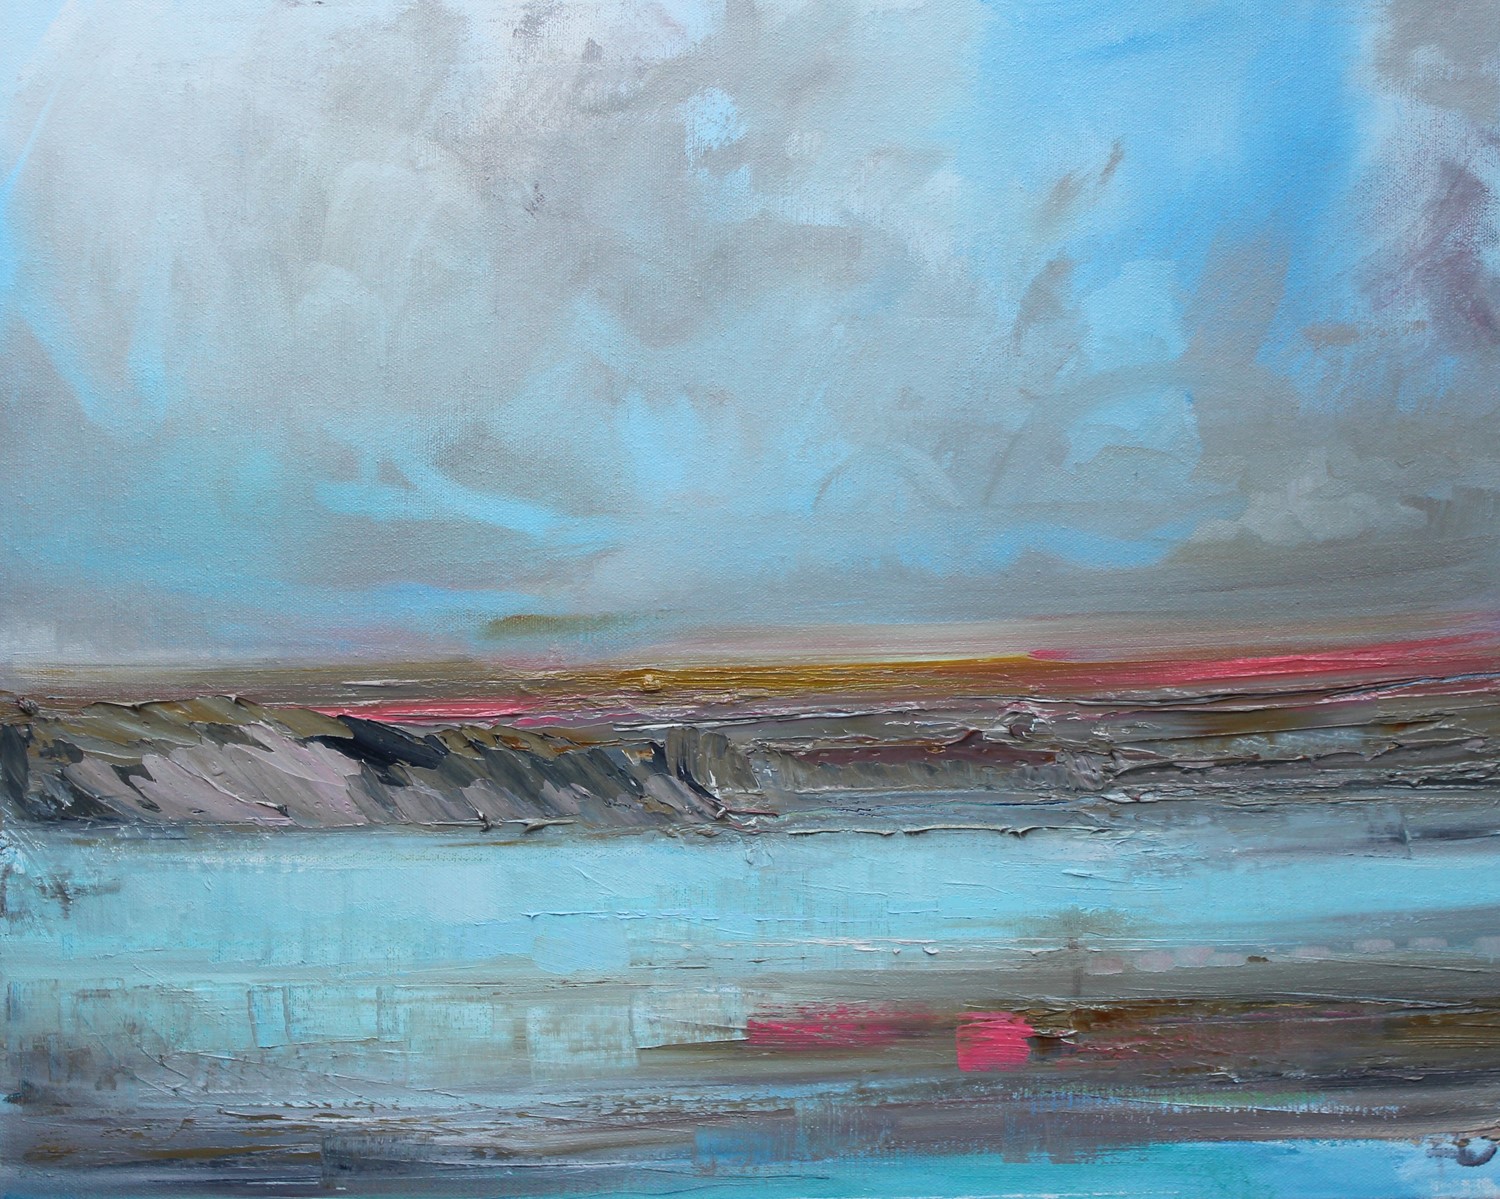 'Clouds shifting across the Cliffs' by artist Rosanne Barr